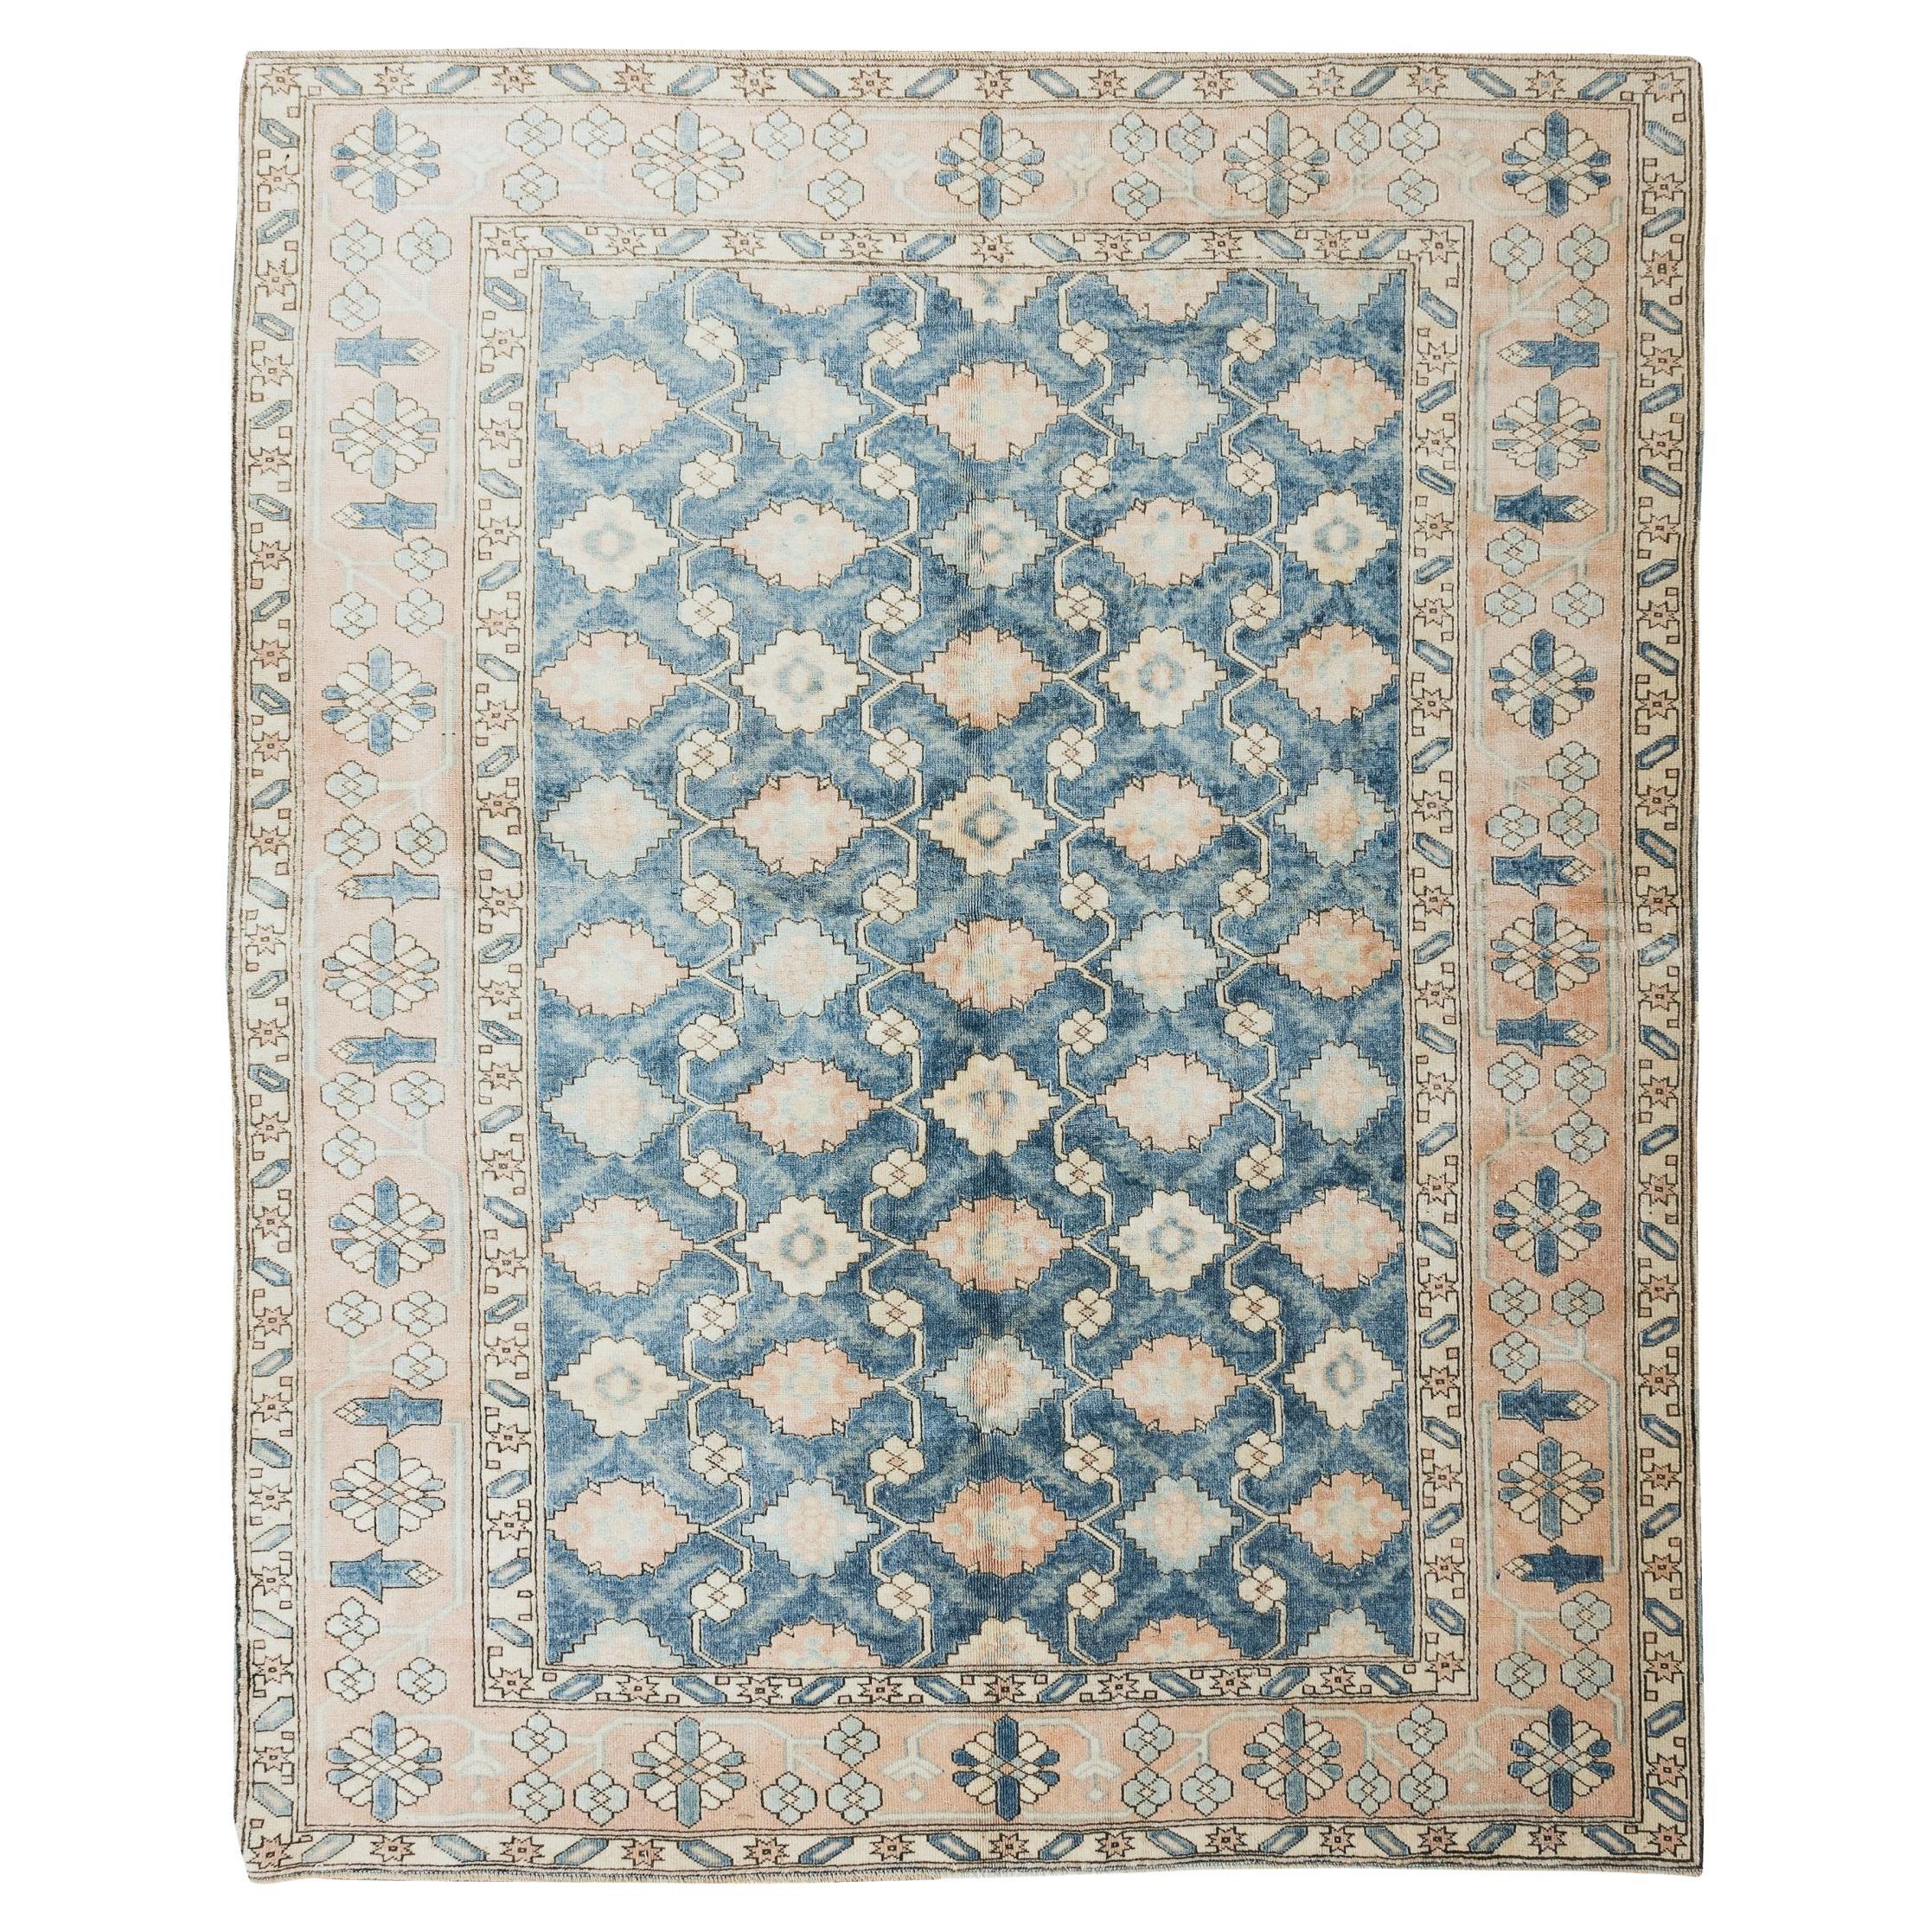 7x8.6 Ft Handmade Turkish Rug for Home & Office, Authentic Vintage Floral Carpet For Sale